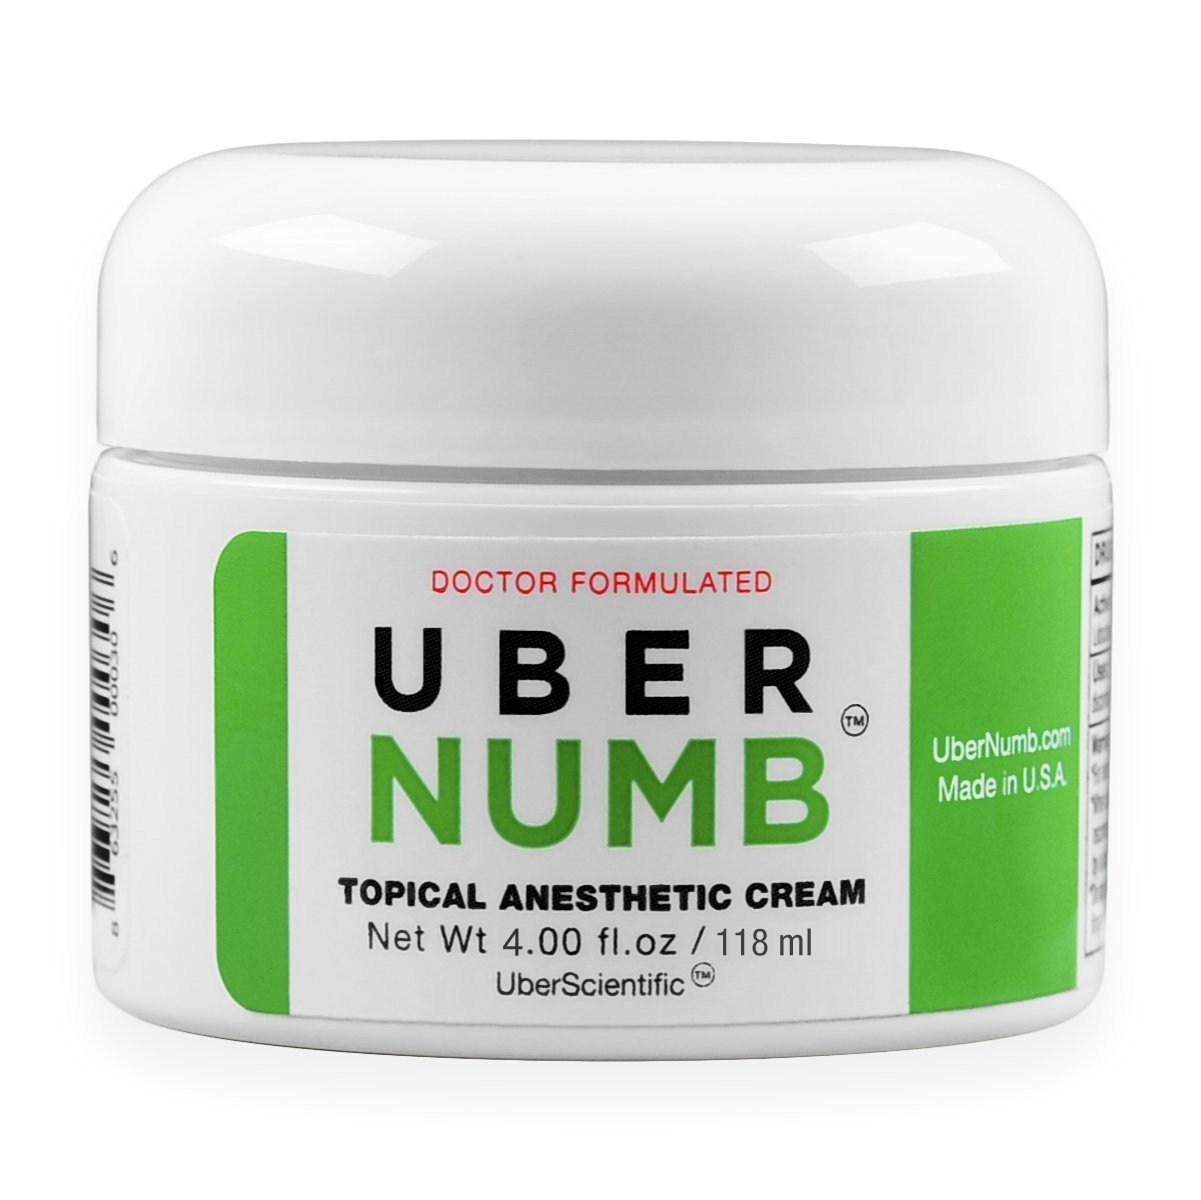 Topical Numbing Cream For Laser Hair Removal